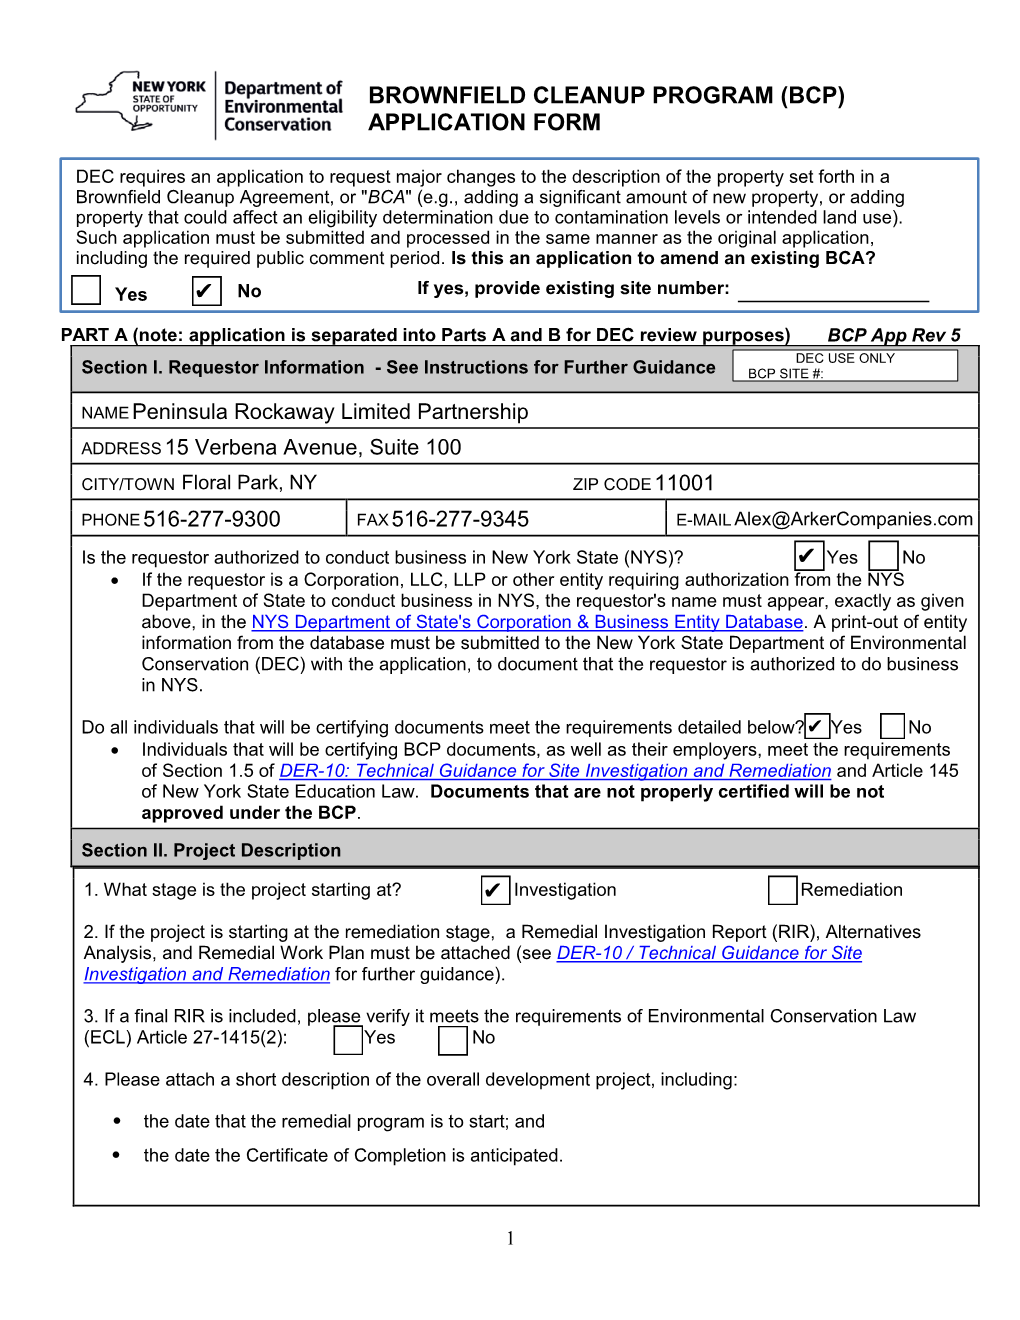 Brownfield Cleanup Program (Bcp) Application Form